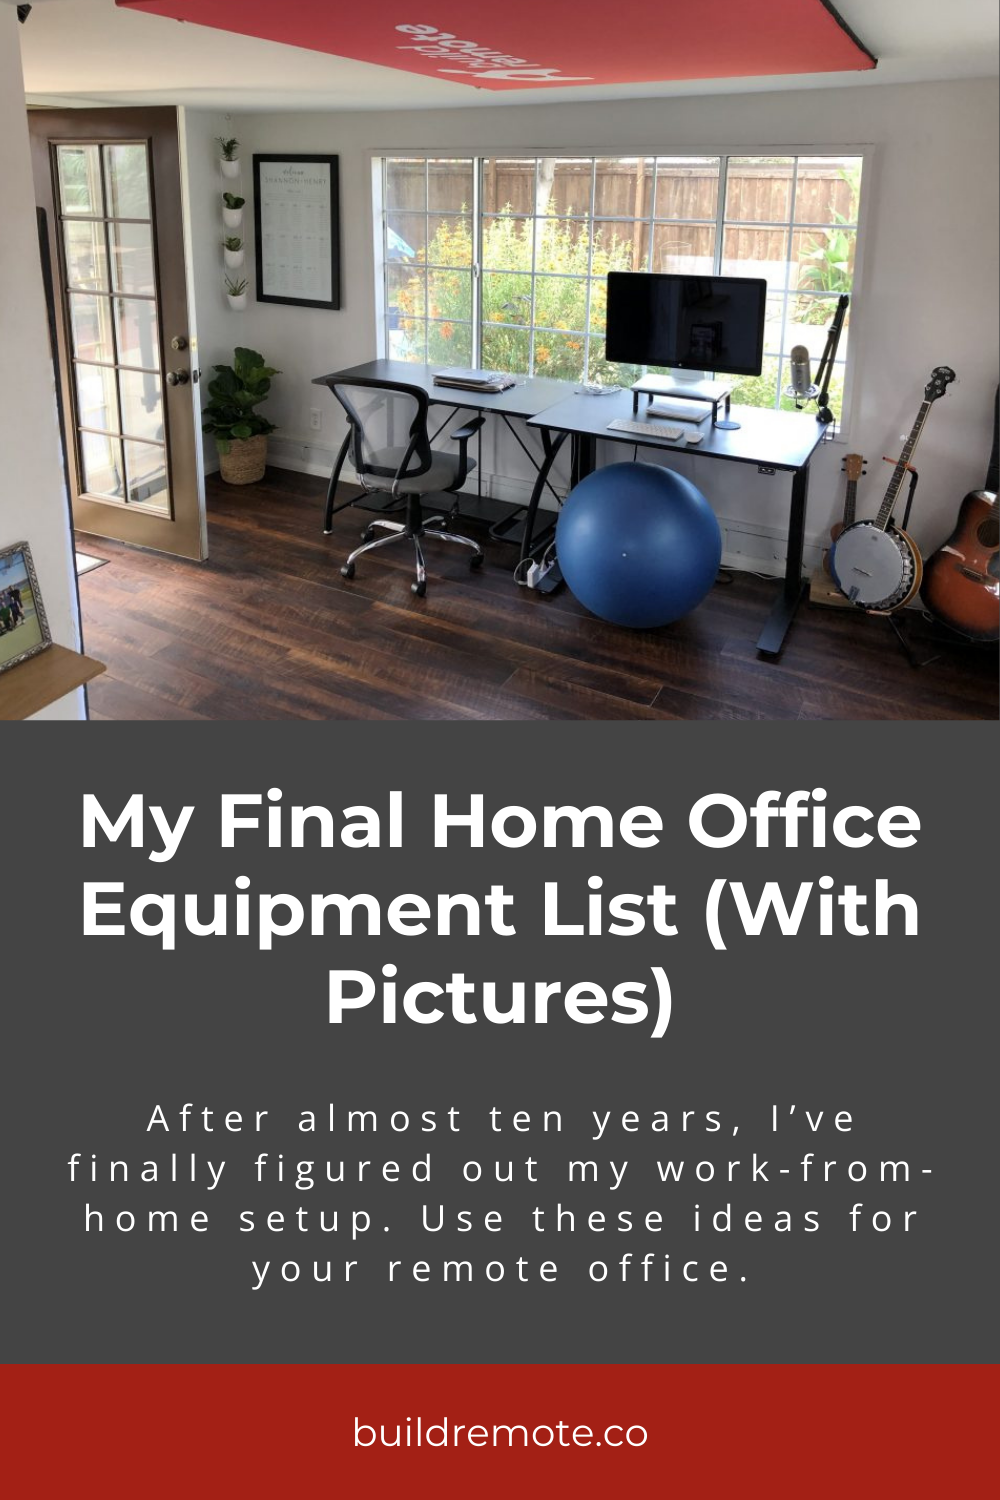 Pinterest Image - My Final Home Office Equipment List (With Pictures)